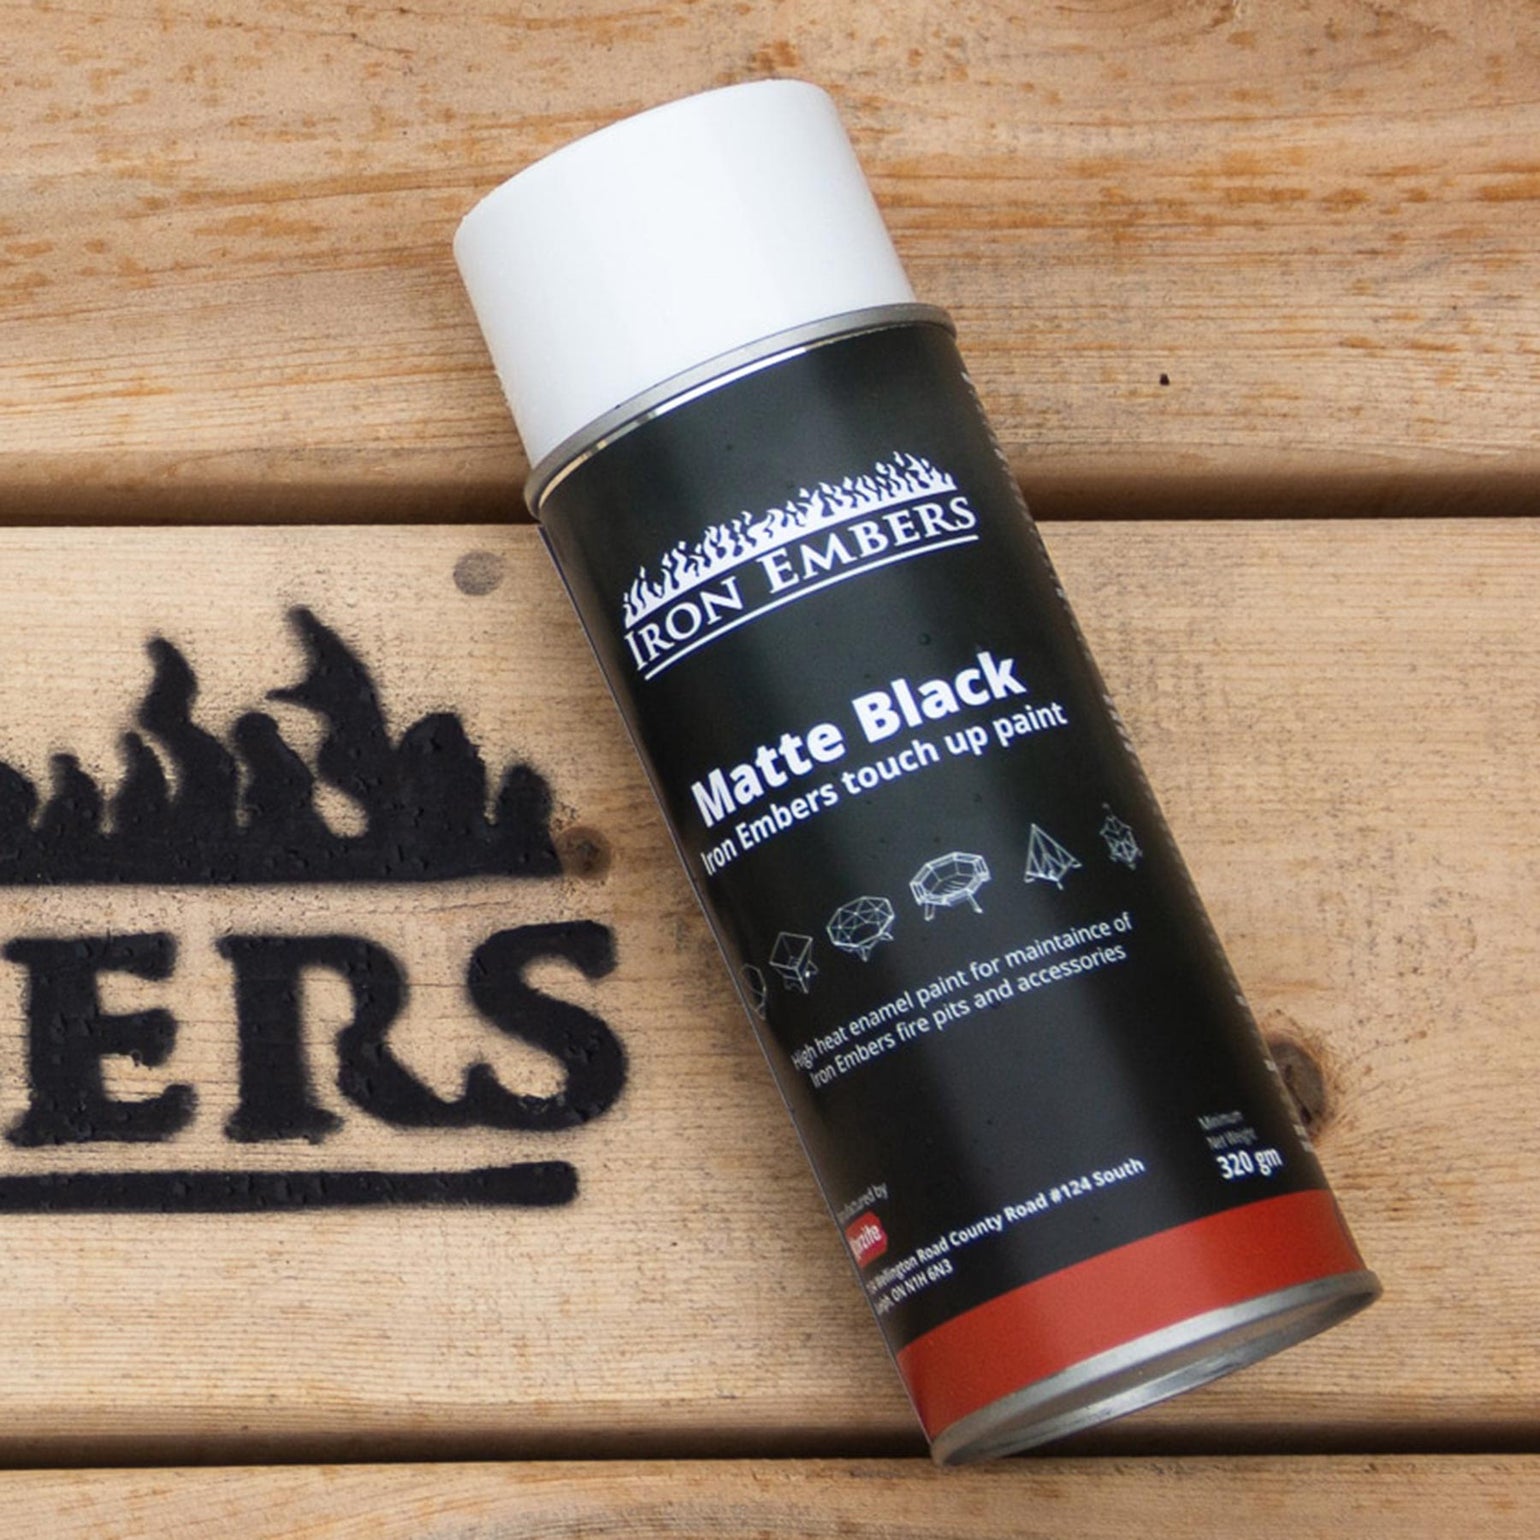 Iron Embers Touch Up Paint (matte black)